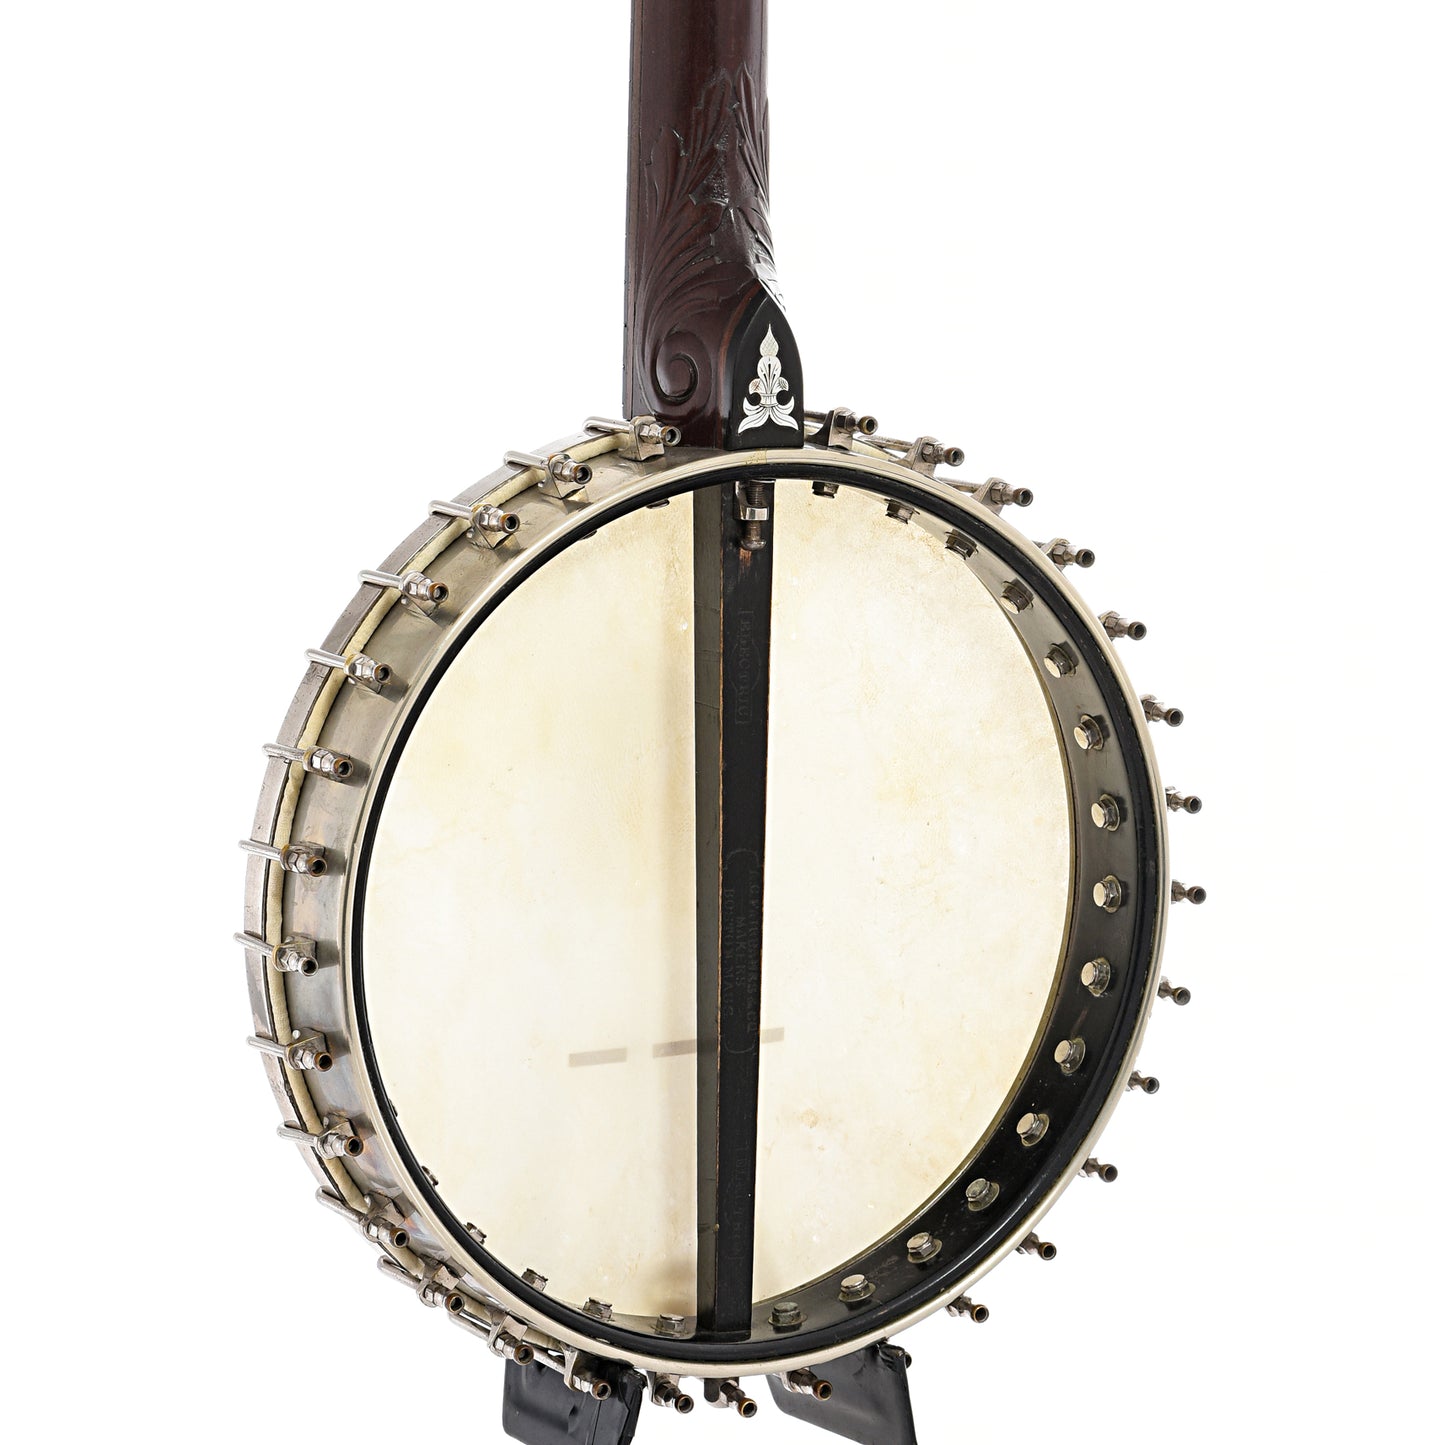 Back and side of A.C. Fairbanks Electric #3 Openback Banjo (c.1892-93)